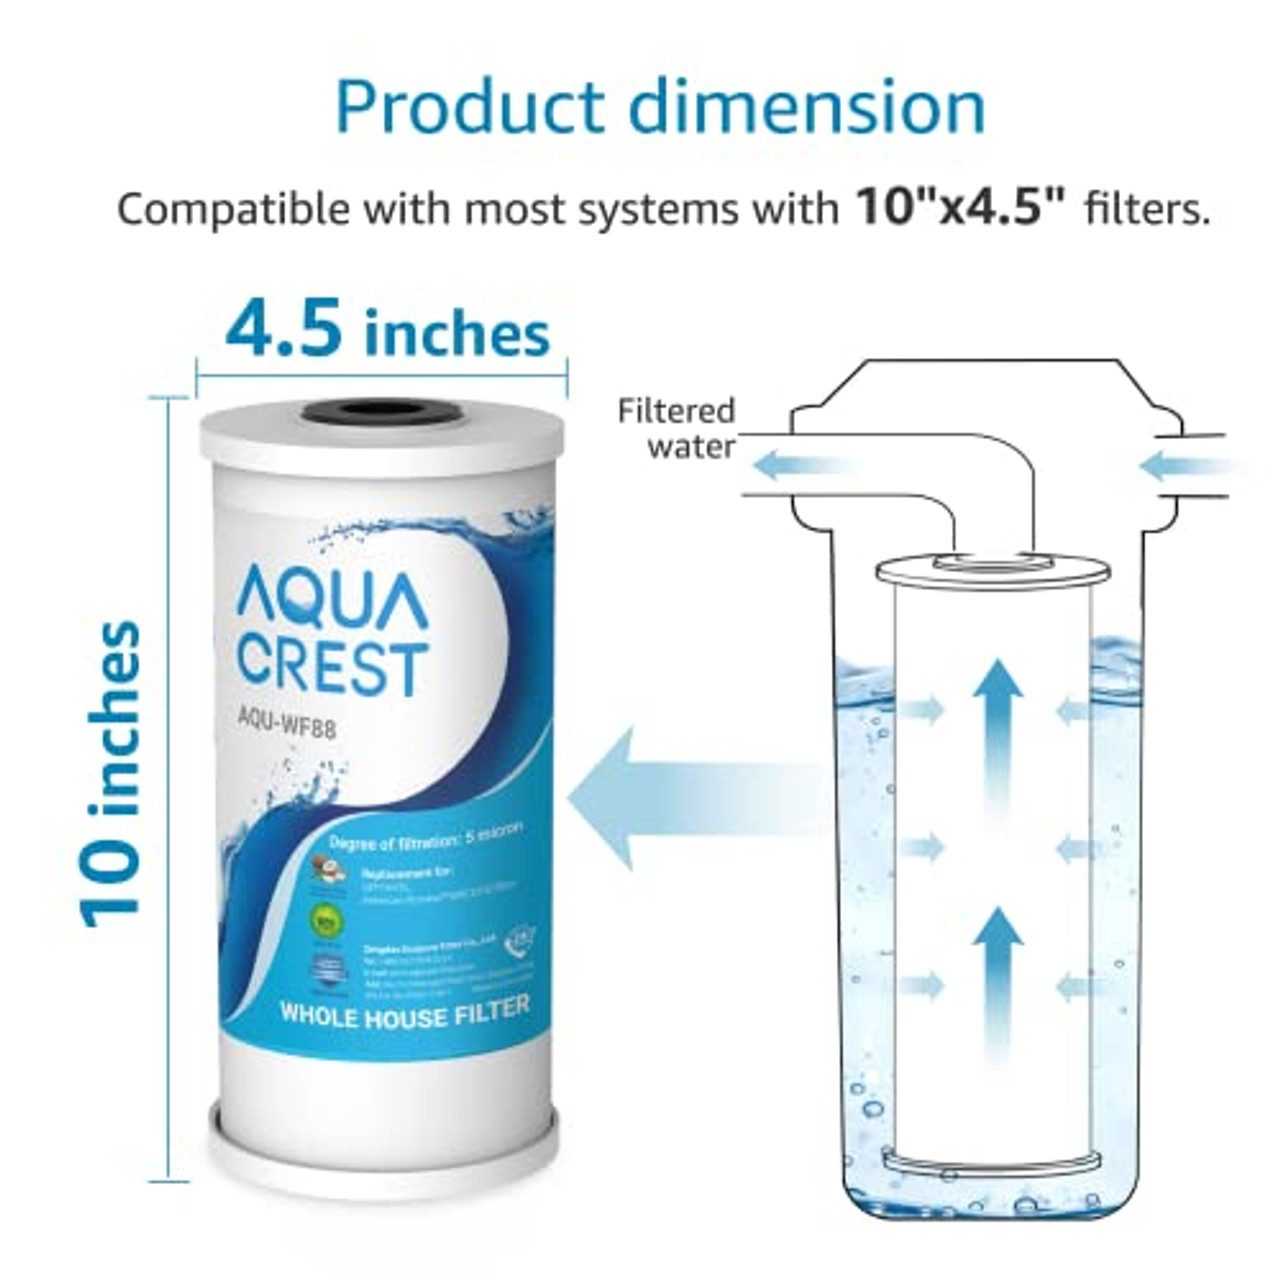 AQUACREST FXHSC Whole House Water Filter, Replacement for GE FXHSC